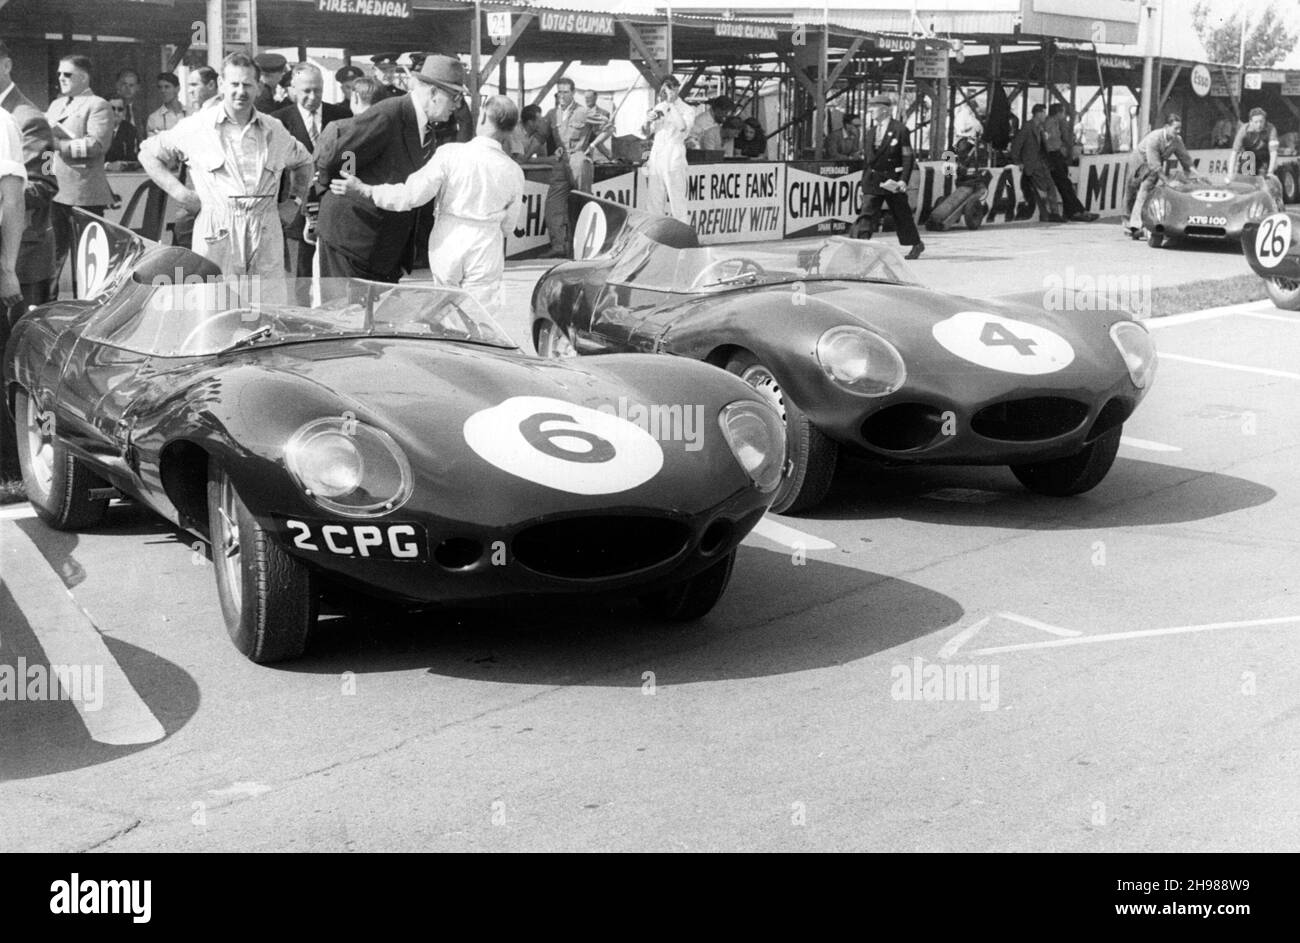 Jaguar D types in the paddock, RAC Tourist Trophy, Goodwood, Sussex, 1958. Car number 6, driven by Duncan Hamilton and Peter Blond came sixth in the race, with the number 4 car of Masten Gregory and Innes Ireland finishing fifth. Stock Photo